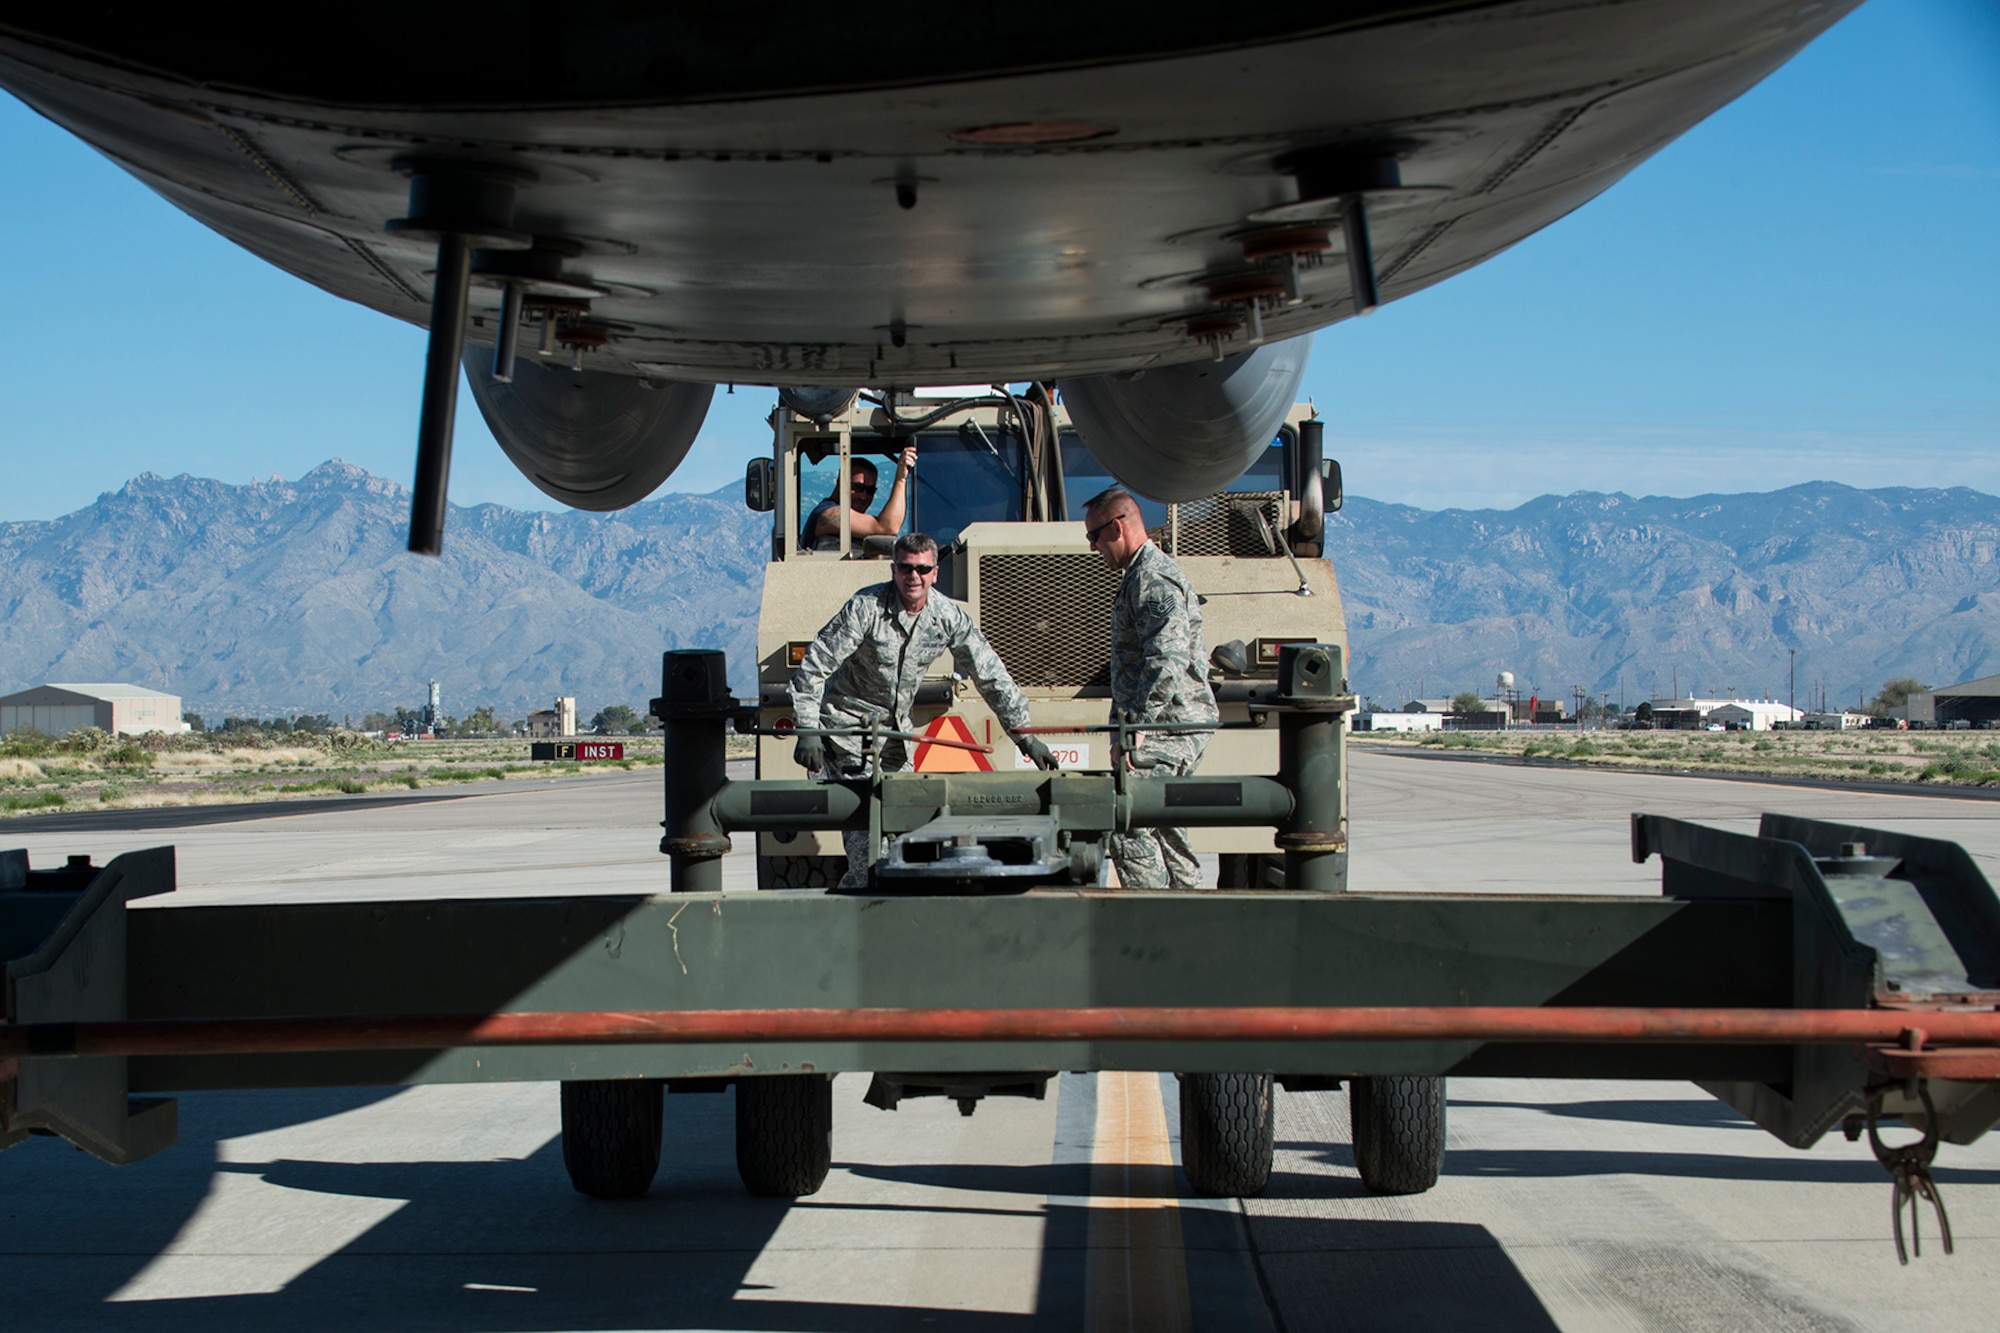 U.S. Air Force Master Sgt. Steve Vance, 307th Aircraft Maintenance Squadron crew chief, and Tech. Sgt. Jonathan Spears, 307th Maintenance Squadron engine specialist, disconnect a tow bar from a B-52H Stratofortress on Feb. 11, 2015, Davis-Monthan Air Force Base, Ariz. The aircraft, tail number 61-007 and known as the "Ghost Rider", is being regenerated for active service after sitting in storage since 2008 when it was decommissioned and sent the Boneyard. (U.S. Air Force photo by Master Sgt. Greg Steele/Released)